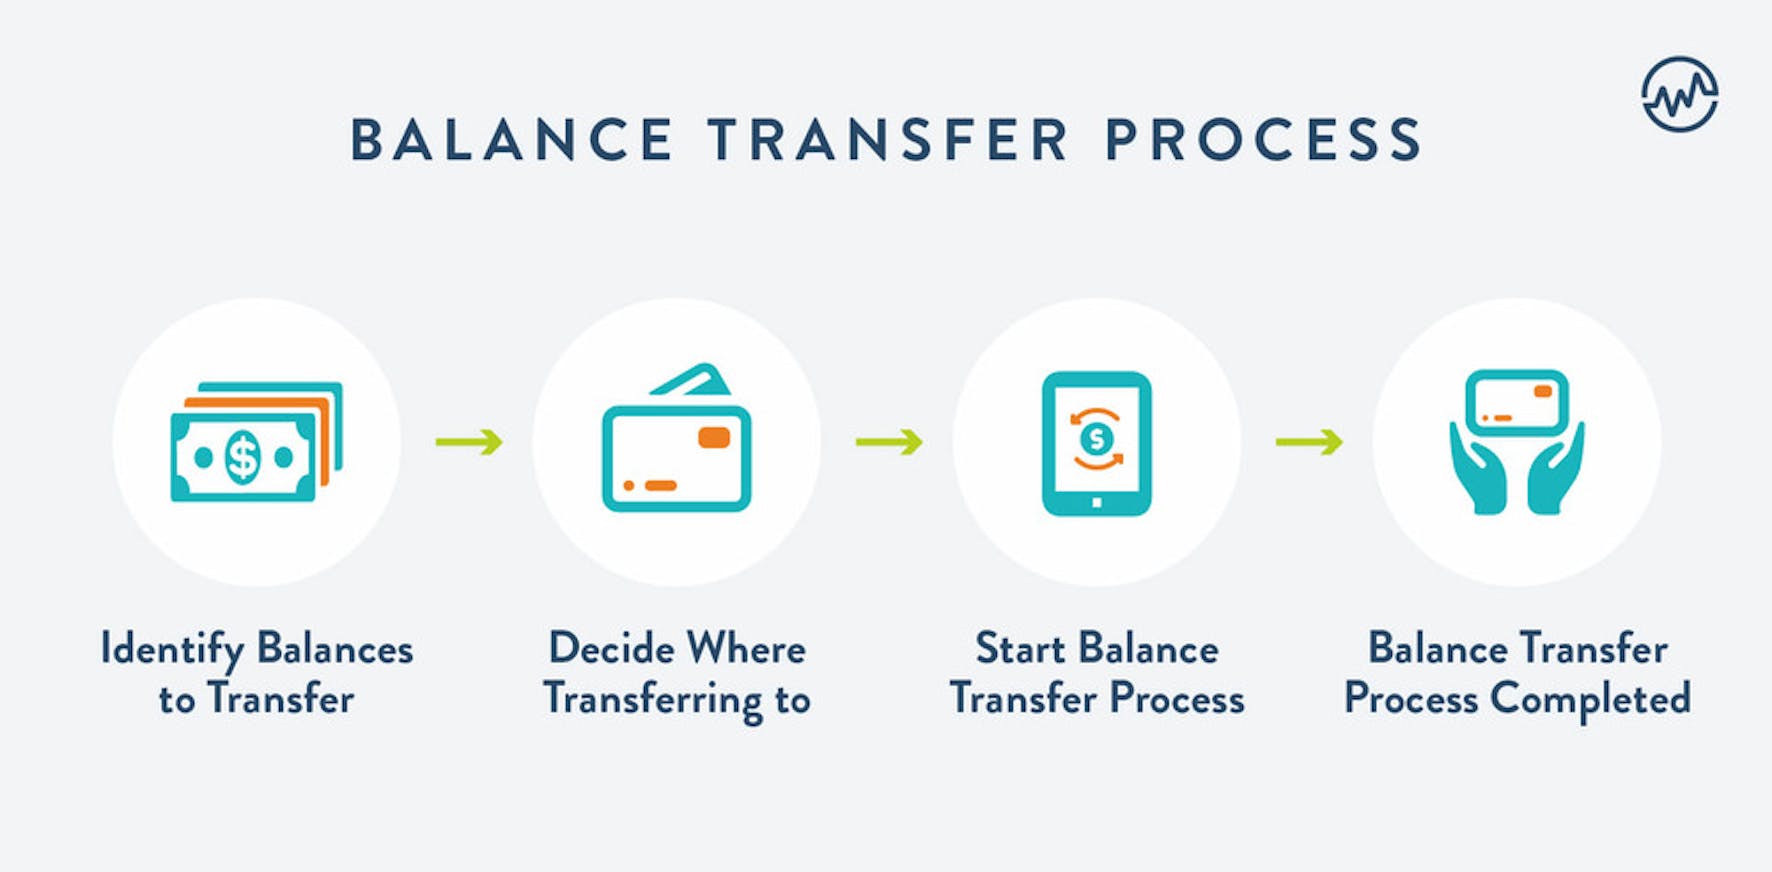 How To Do A Balance Transfer The RIGHT Way WealthFit